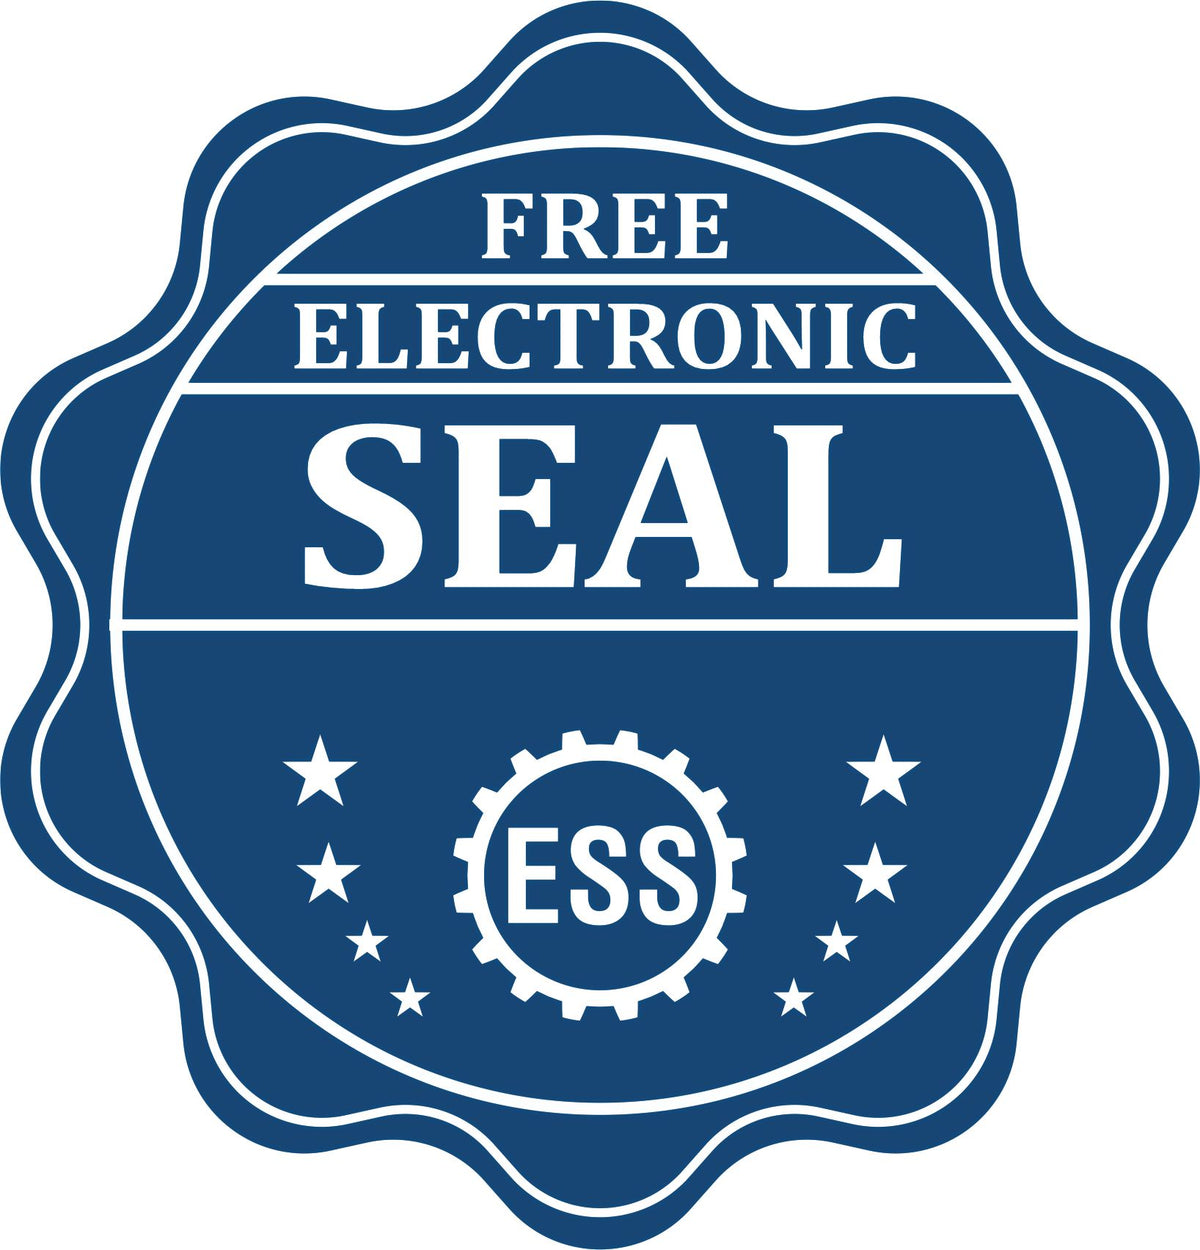 A badge showing a free electronic seal for the Premium MaxLight Pre-Inked New Mexico Landscape Architectural Stamp with stars and the ESS gear on the emblem.